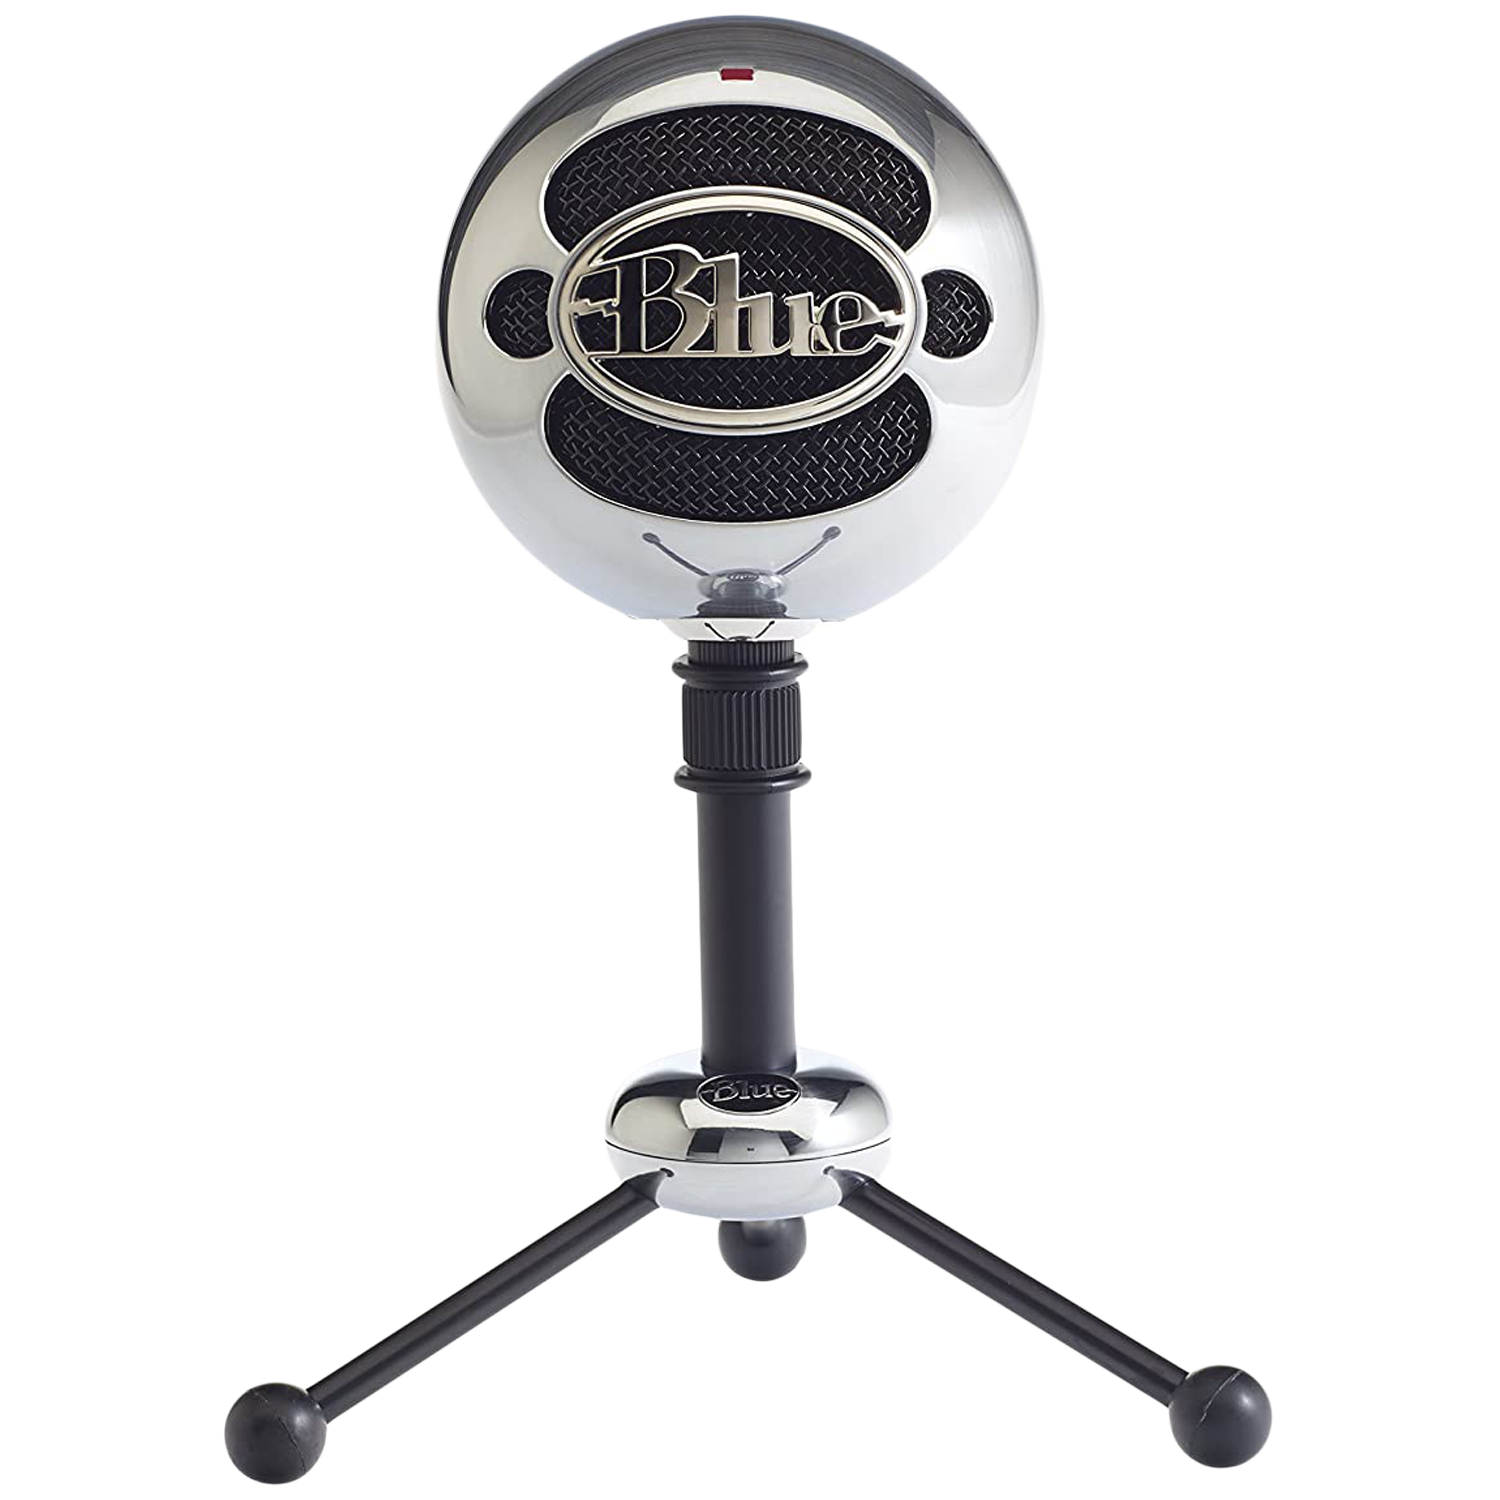 Logitech Snowball Tripod Mount Wired Condenser Microphone (Plug & Play, Brushed Aluminium)_1